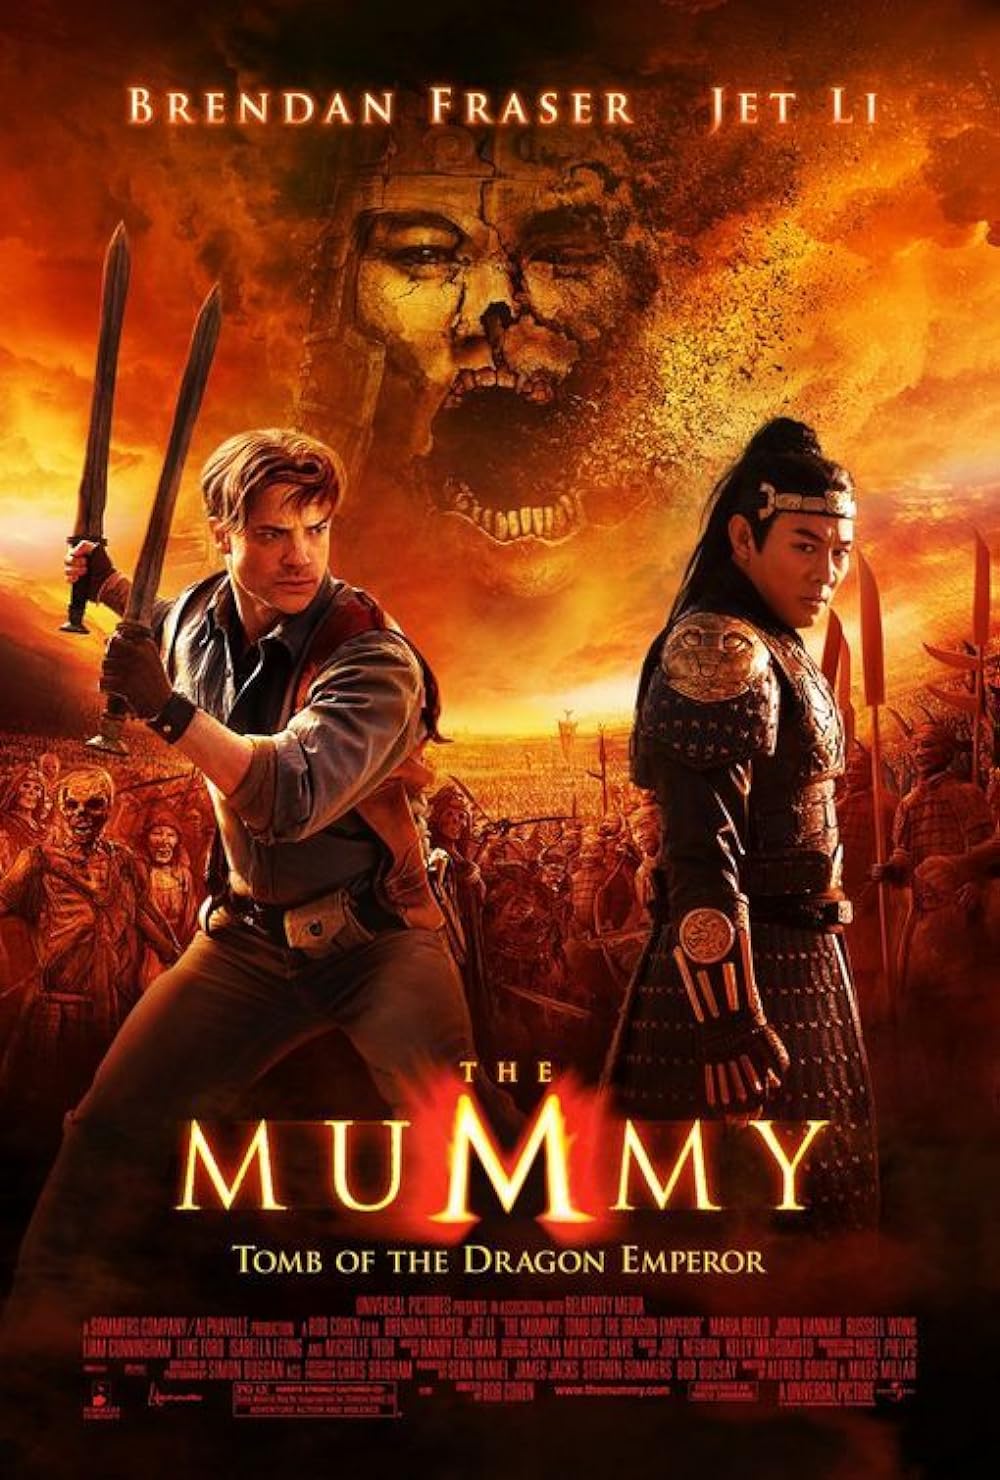 The Mummy: Tomb of the Dragon Emperor (2008) 384Kbps 23.976Fps 48Khz 5.1Ch DVD Turkish Audio TAC